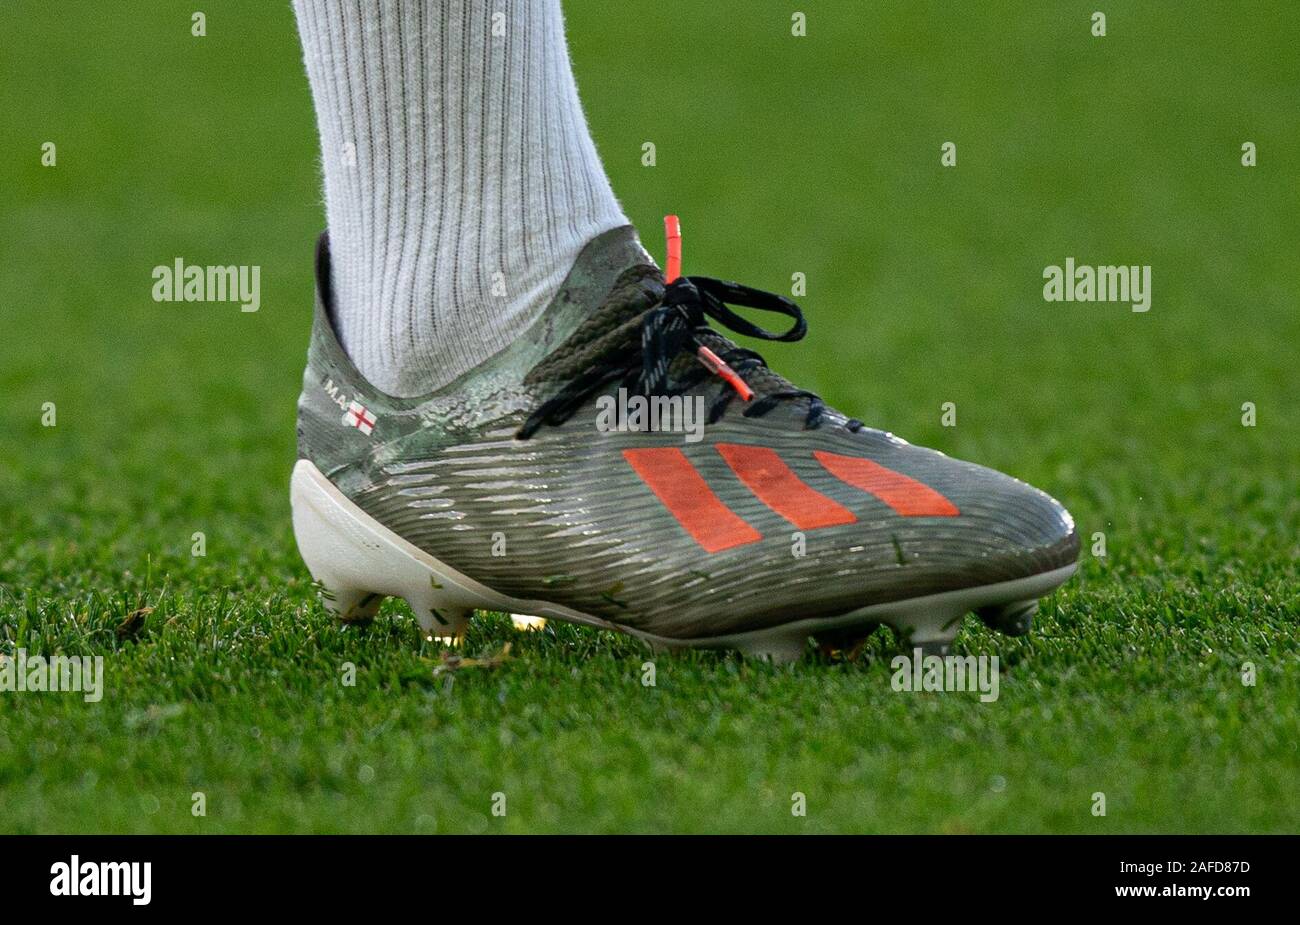 Leicester, UK. 14th Dec, 2019. The Adidas X football boot of Max Aarons of  Norwich City during the Premier League match between Leicester City and  Norwich City at the King Power Stadium,